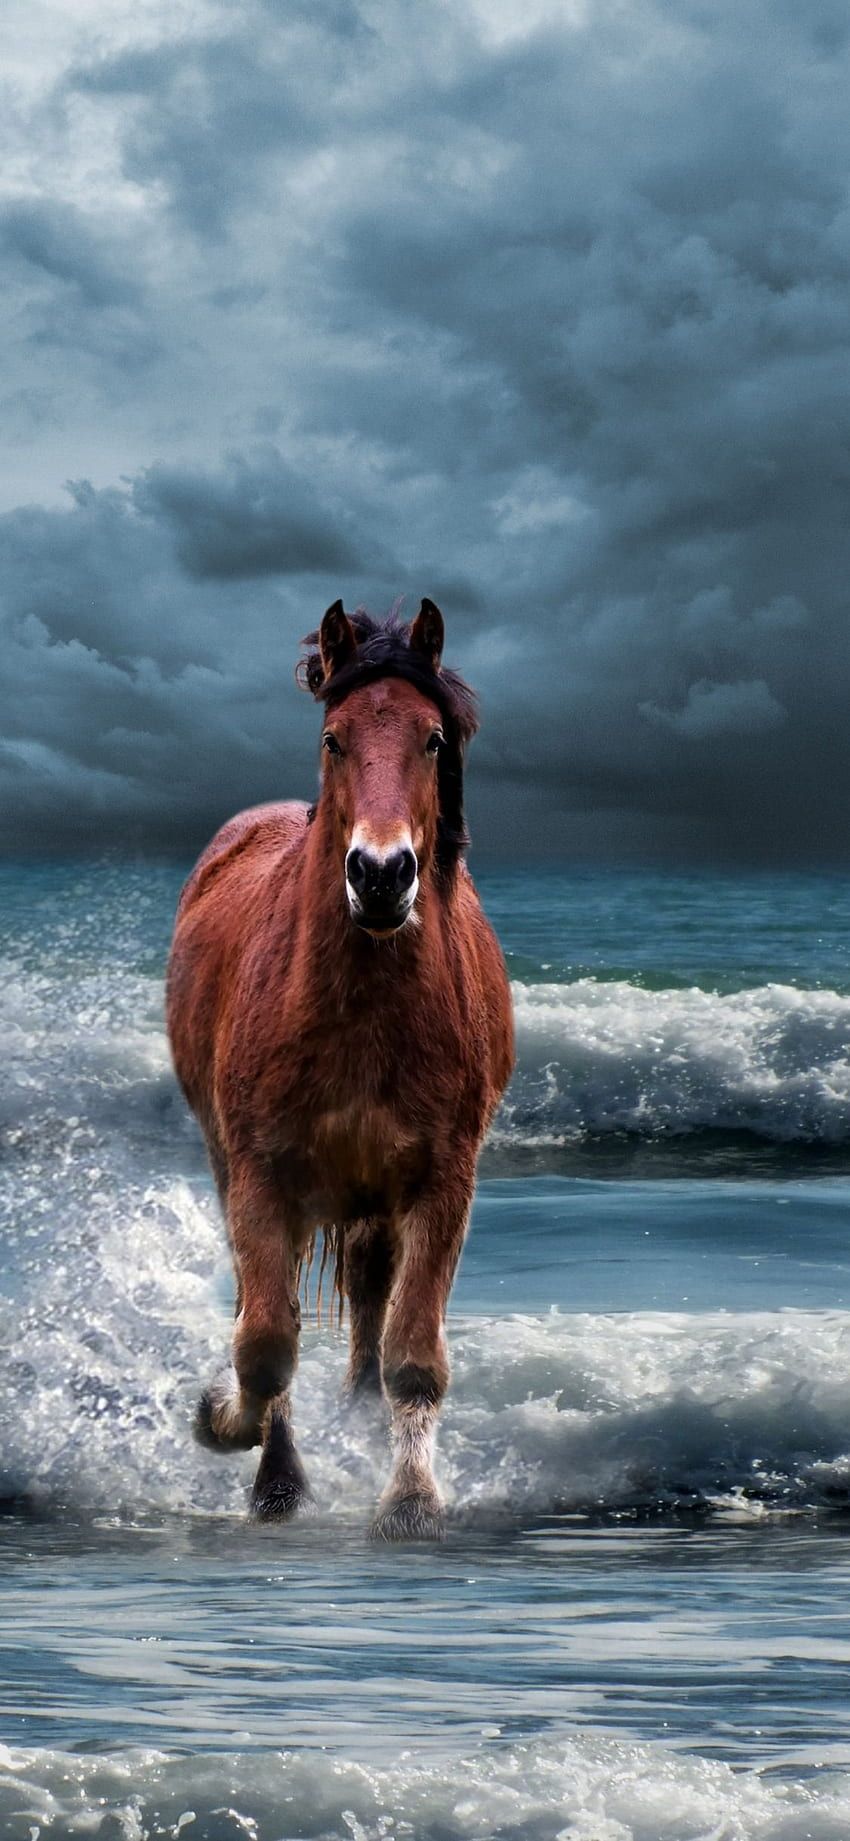 A horse running in the sea - Horse